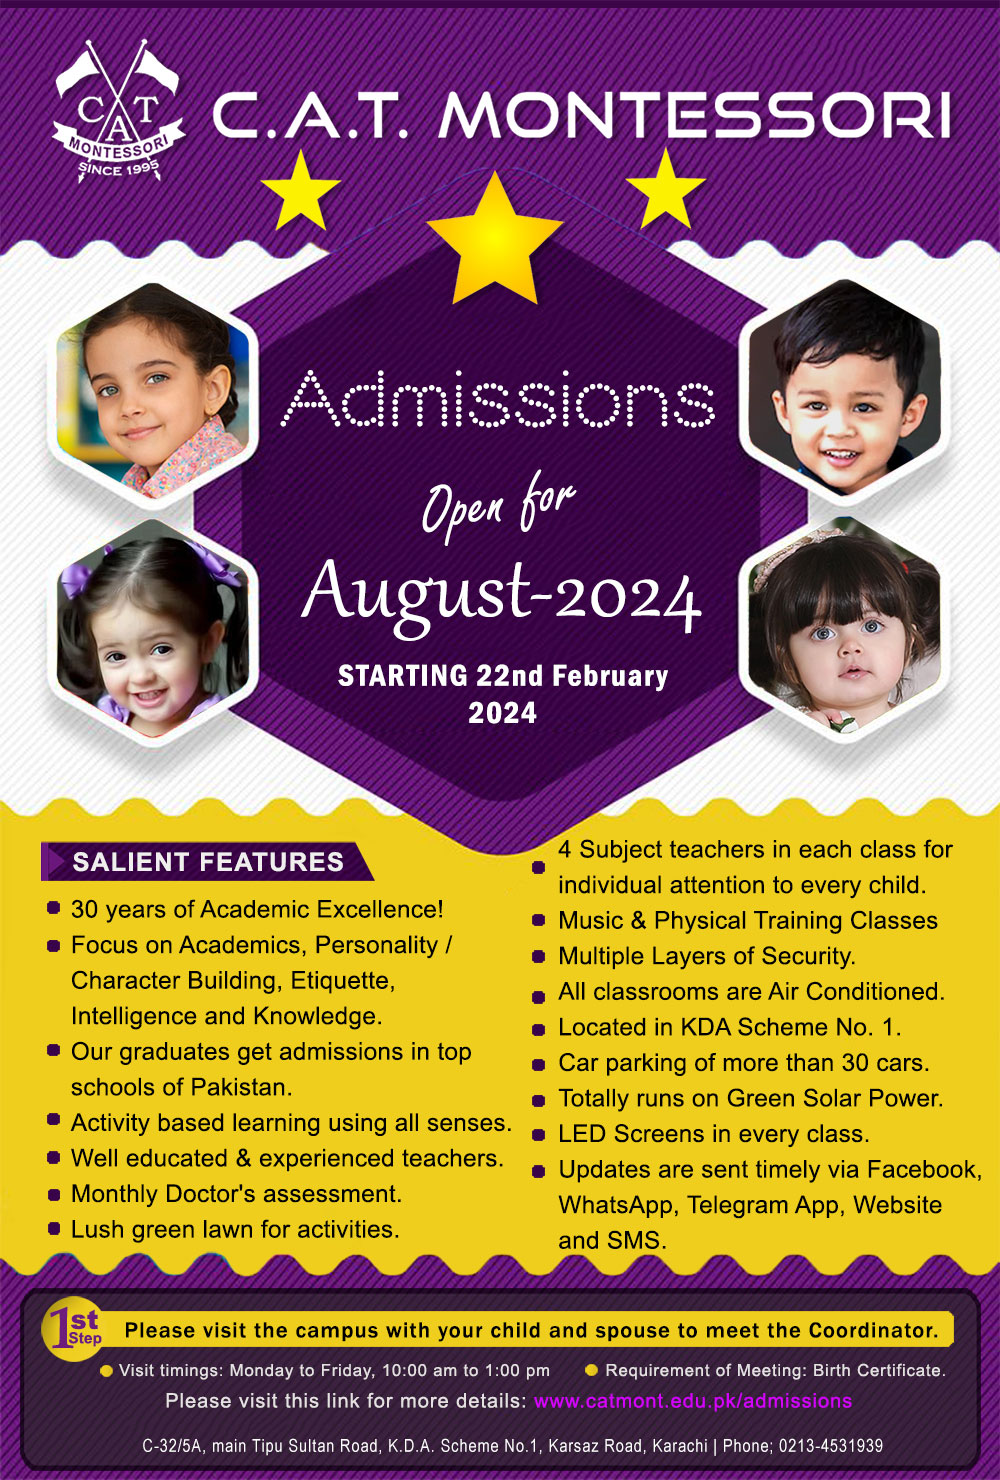 Admissions for August-2024